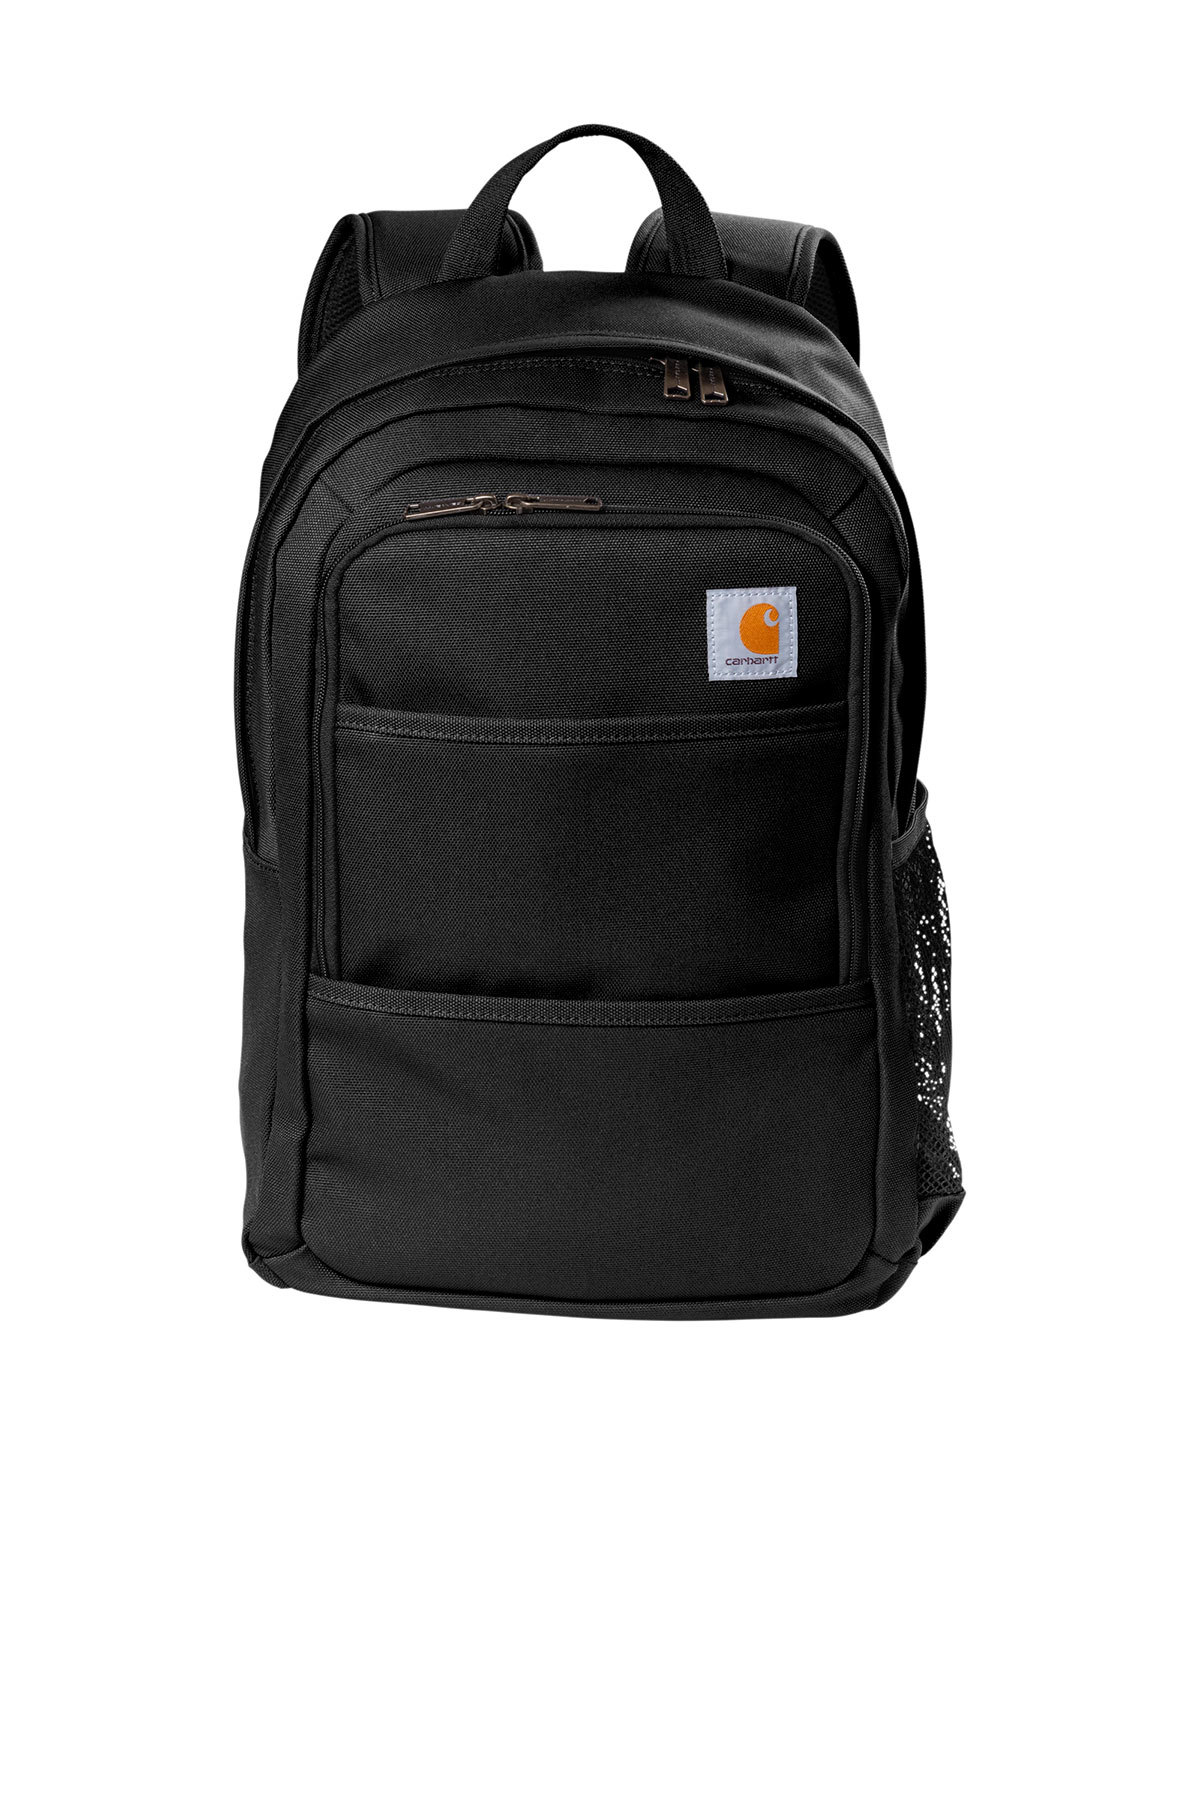 Carhartt Foundry Series Backpack | Product | Company Casuals